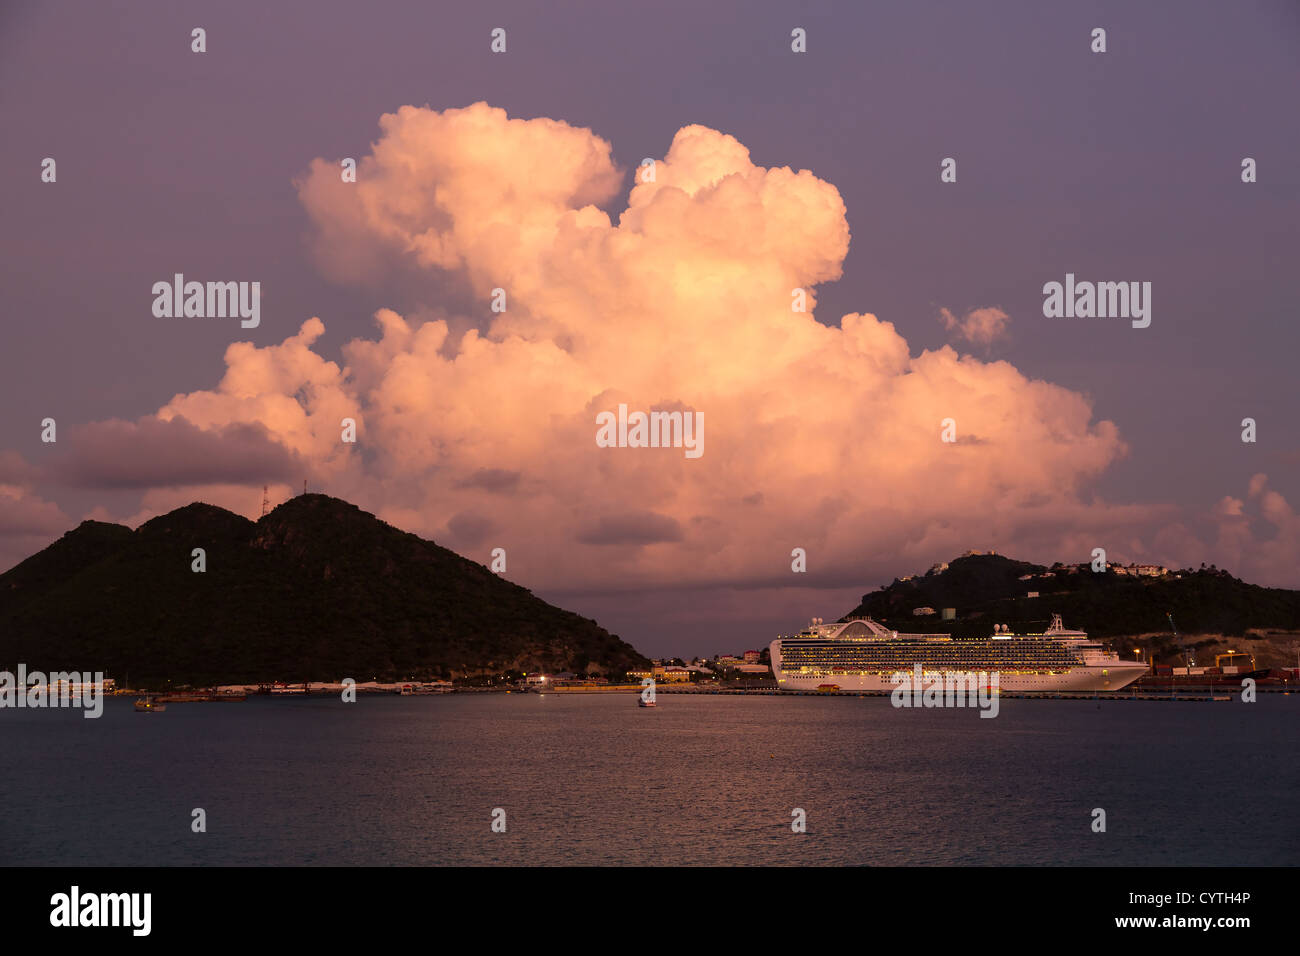 Dramatic evening sunset image of cruise ship in town of Philipsburg in Sint Maarten or Saint St. Martin in Caribbean Stock Photo